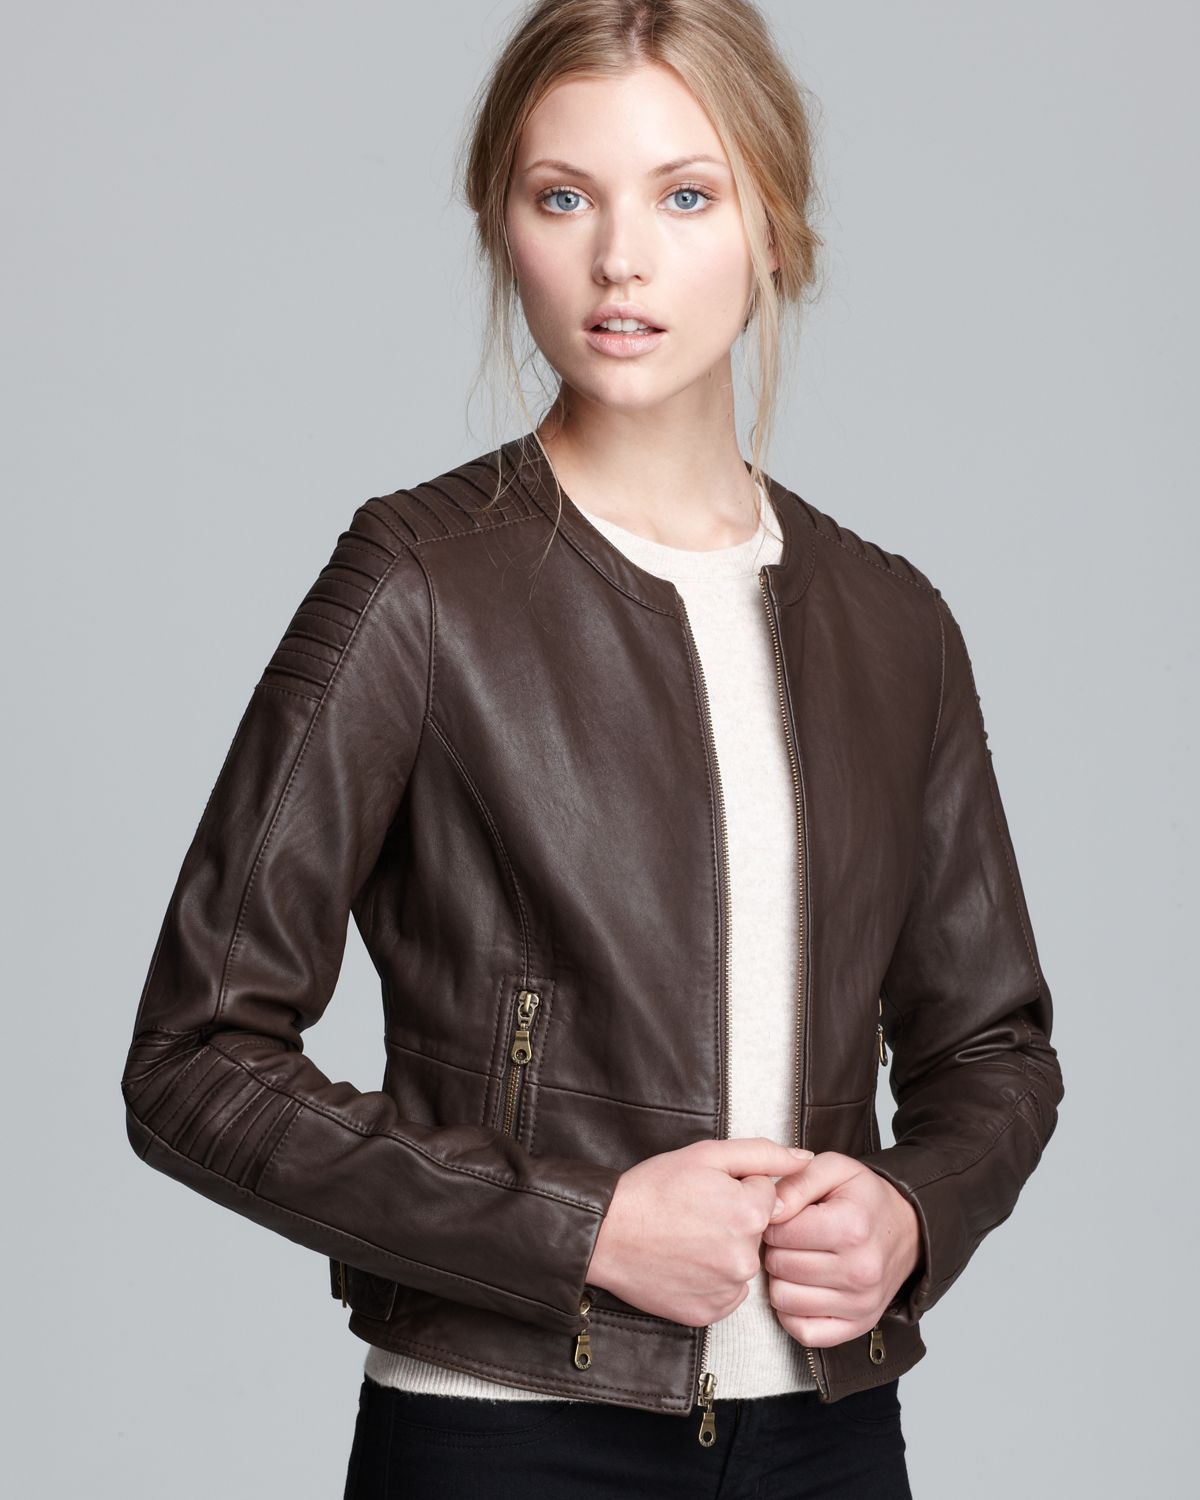 Lyst - Dkny Leather Jacket - Collarless Shoulder Seaming in Natural